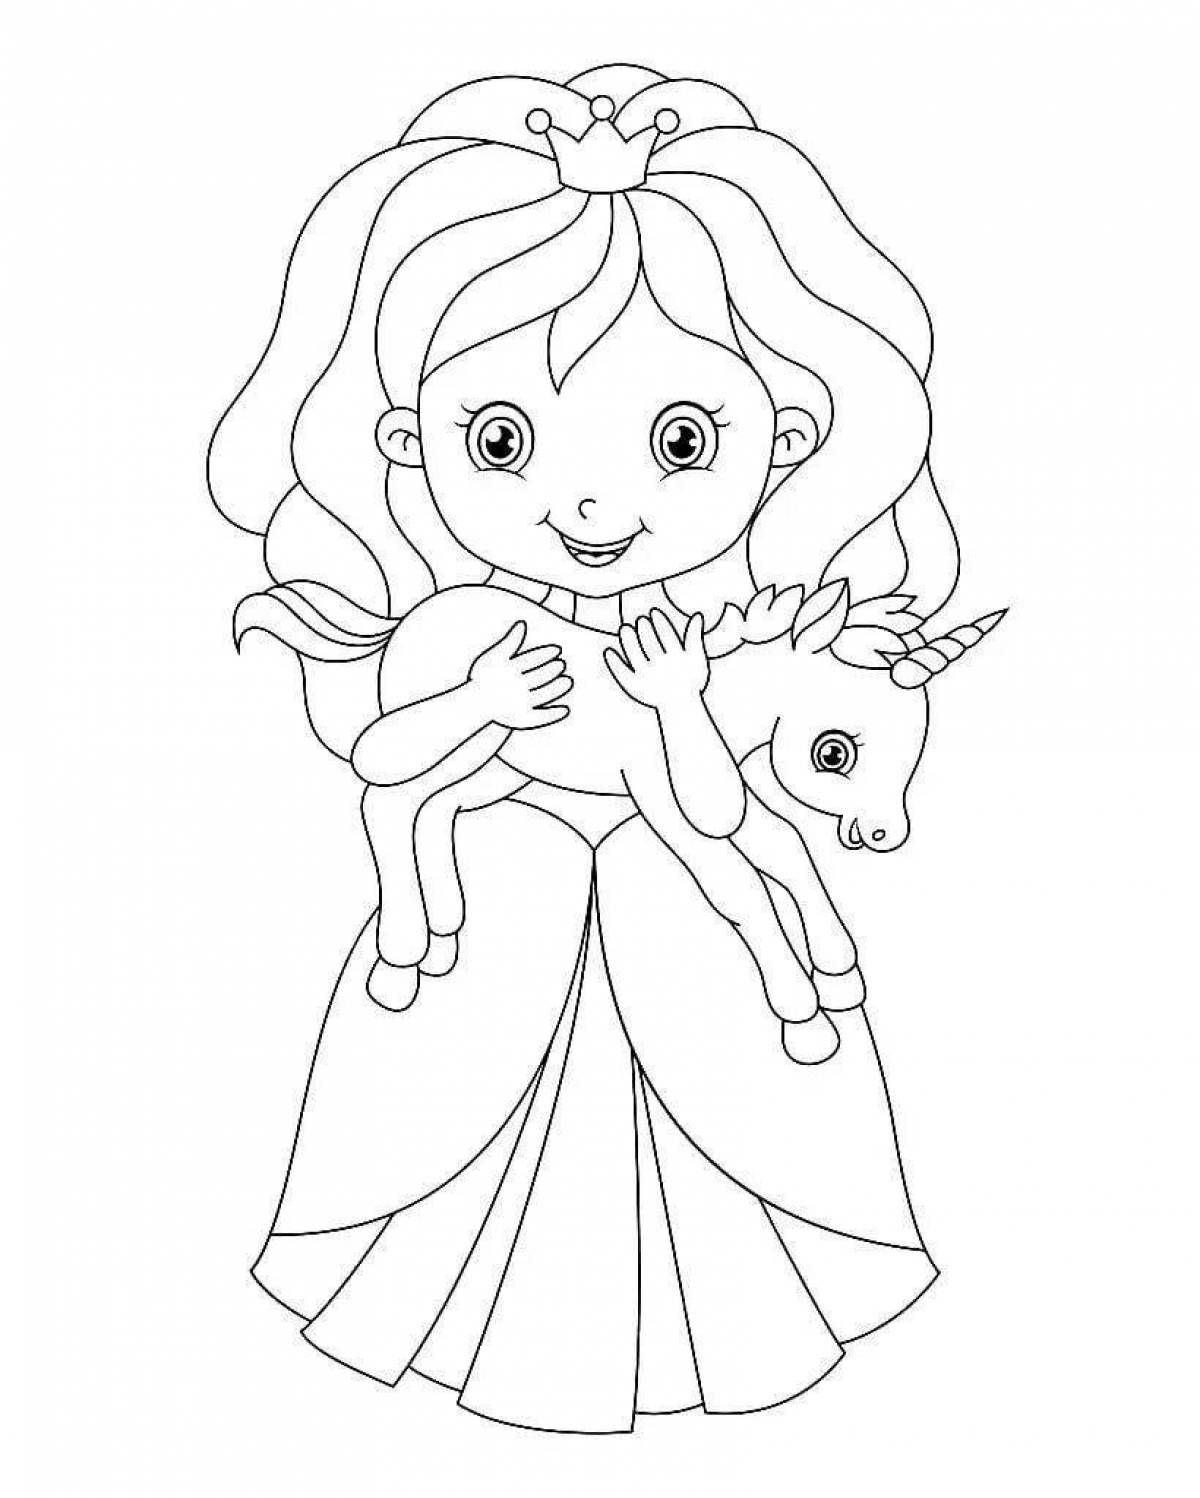 A wonderful coloring book for girls 5-6 years old